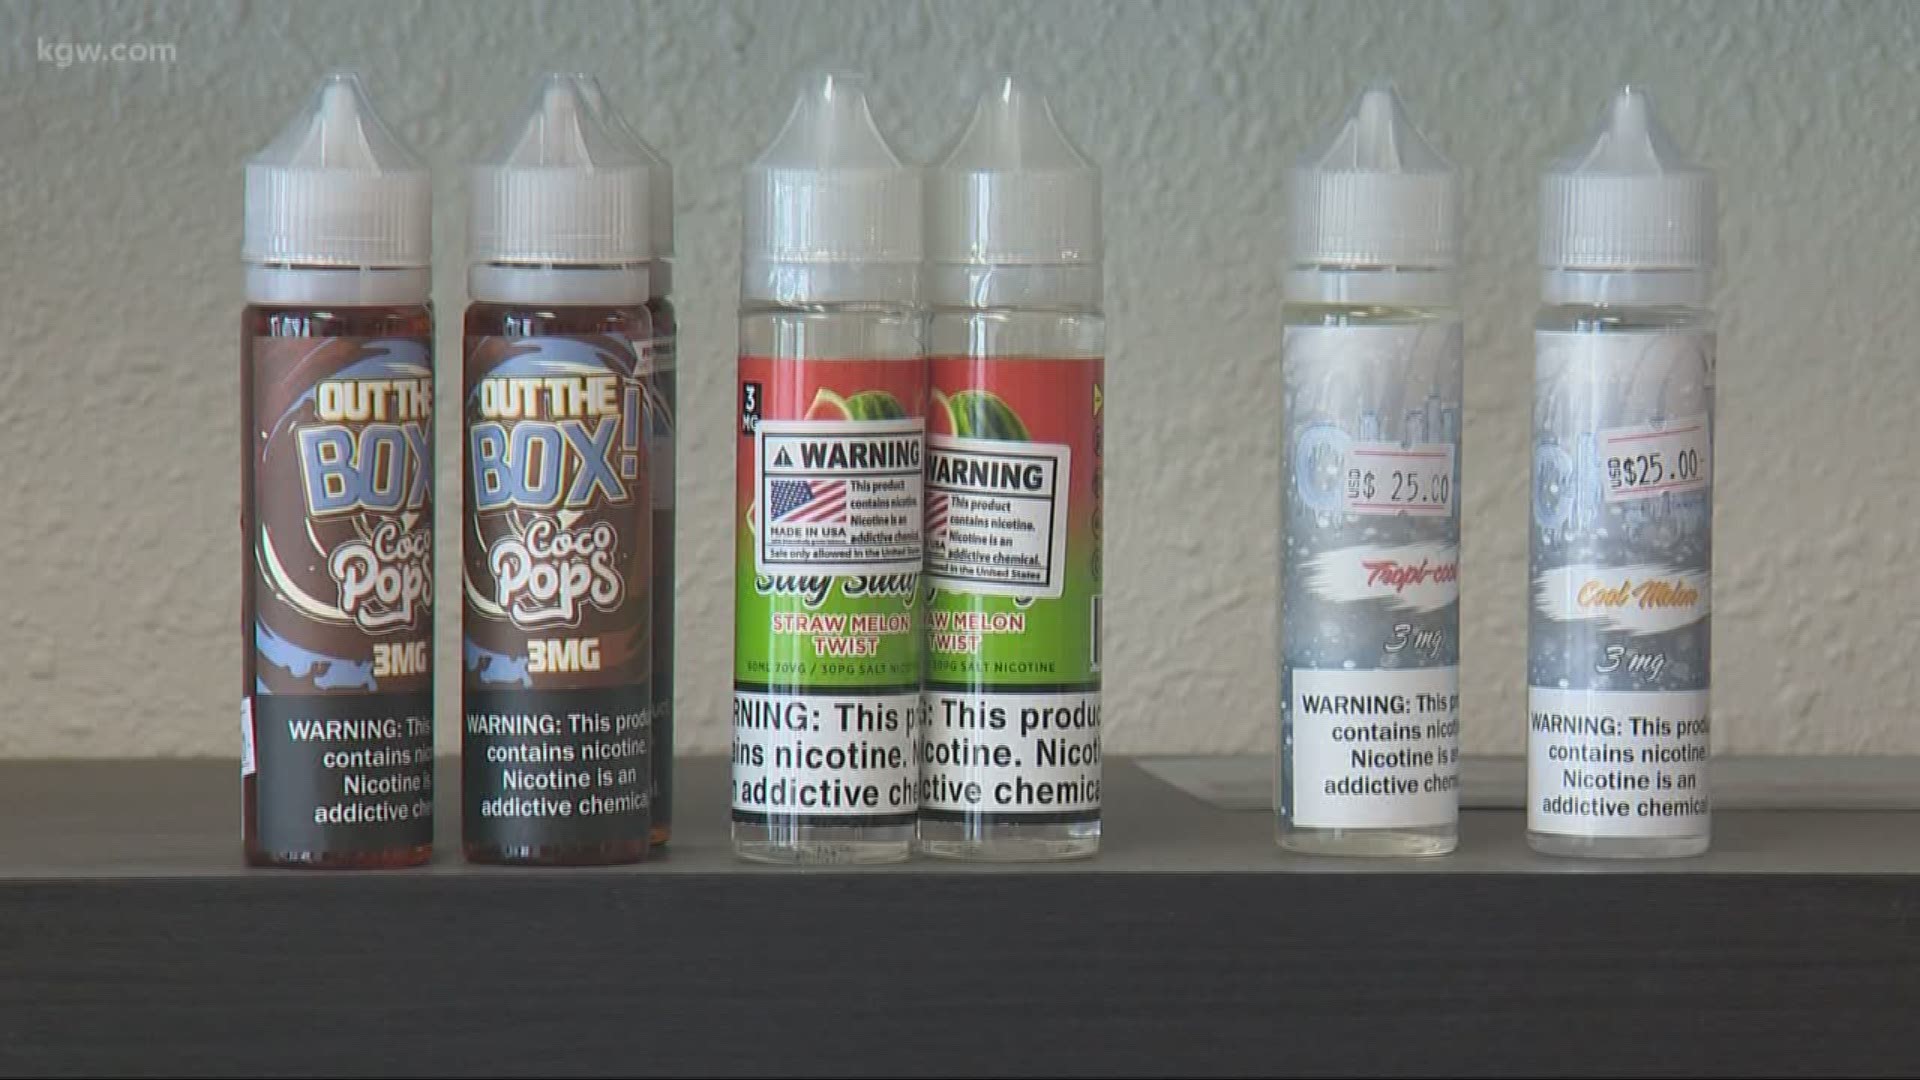 Oregon Gov. Kate Brown has issued a statewide ban on flavored vaping products. The ban will be temporary and last 180 days.